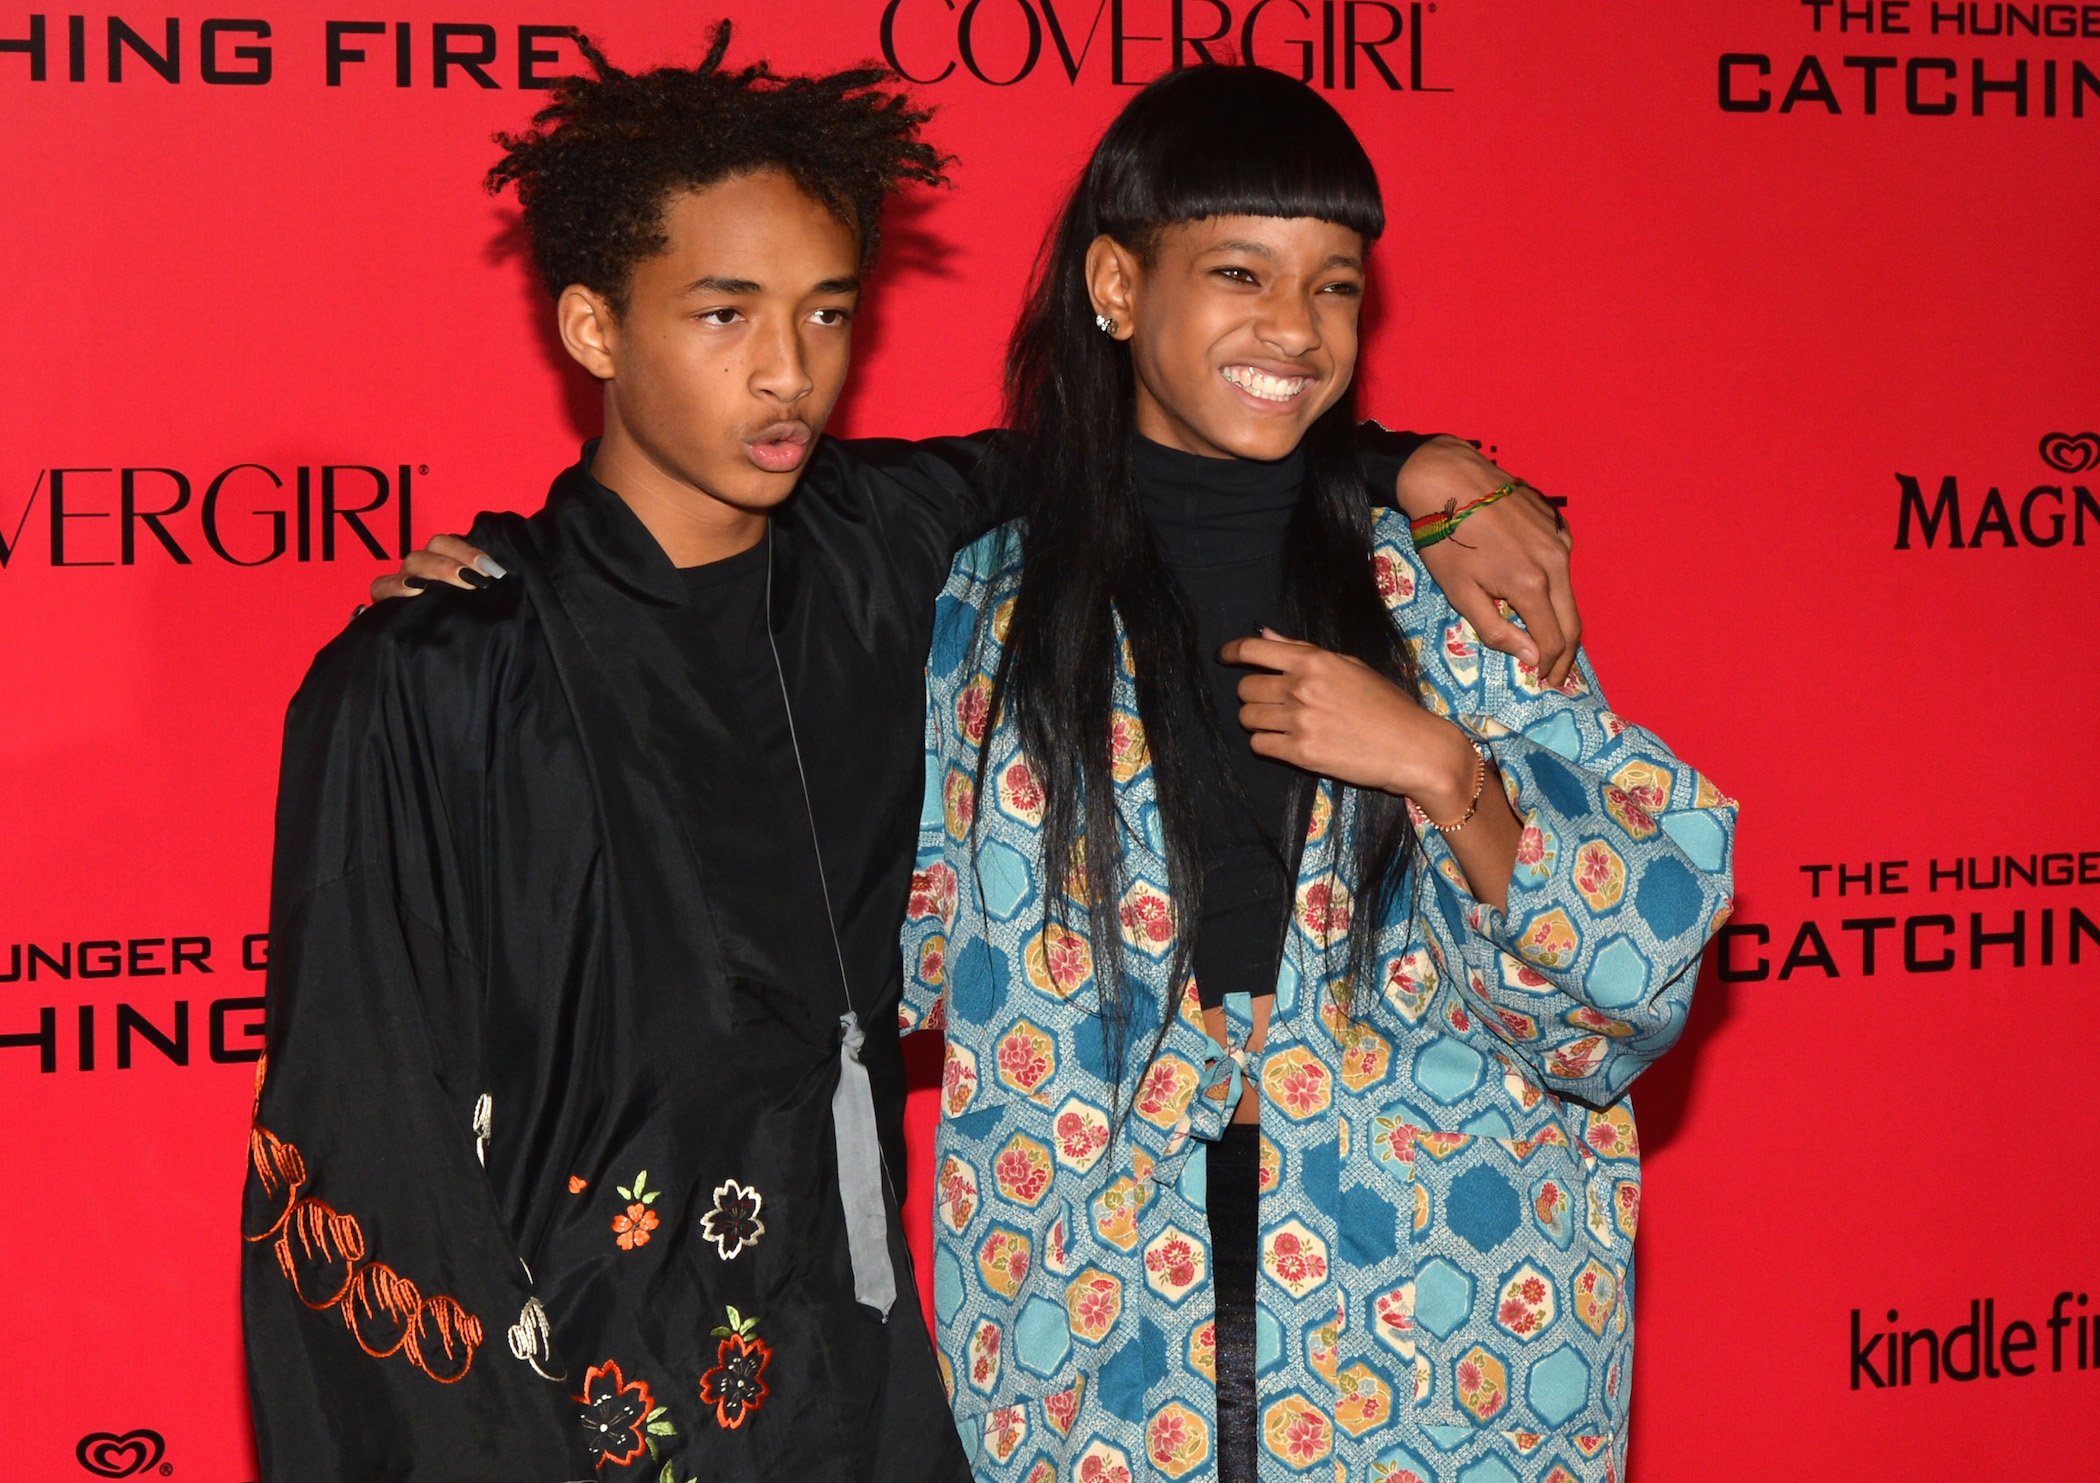 Jaden Smith and Willow Smith arrive at the Los Angeles prremiere of 'The Hunger Games: Catching Fire' at Nokia Theatre